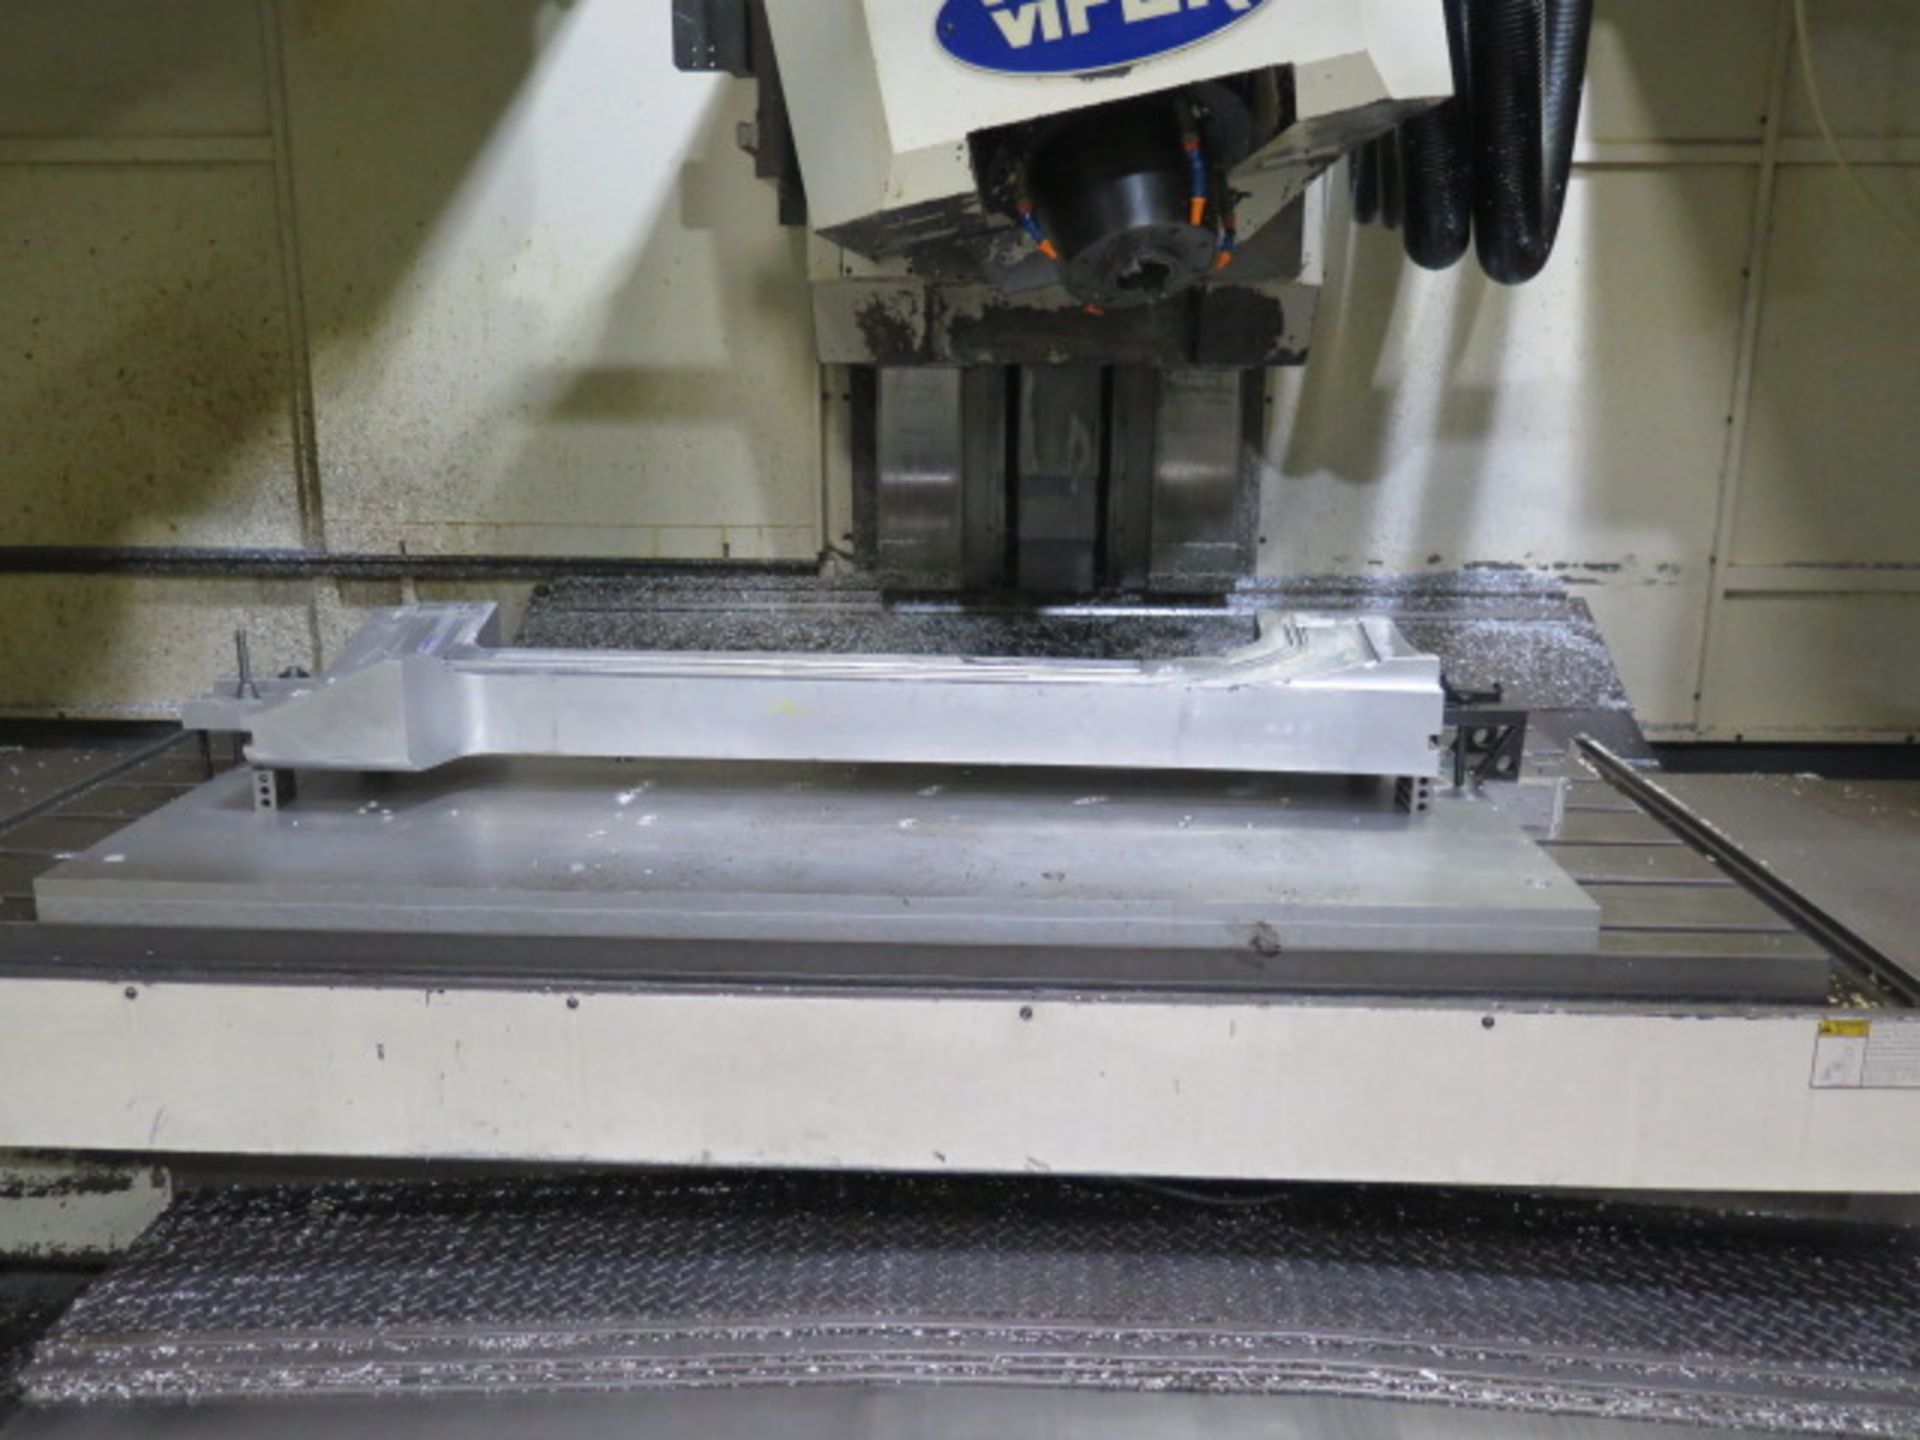 2010 Mighty Viper VMC-2100 5AB True 5-Axis CNC VMC, s/n 011795 w/ Fanuc 30i MODEL A, SOLD AS IS - Image 10 of 26